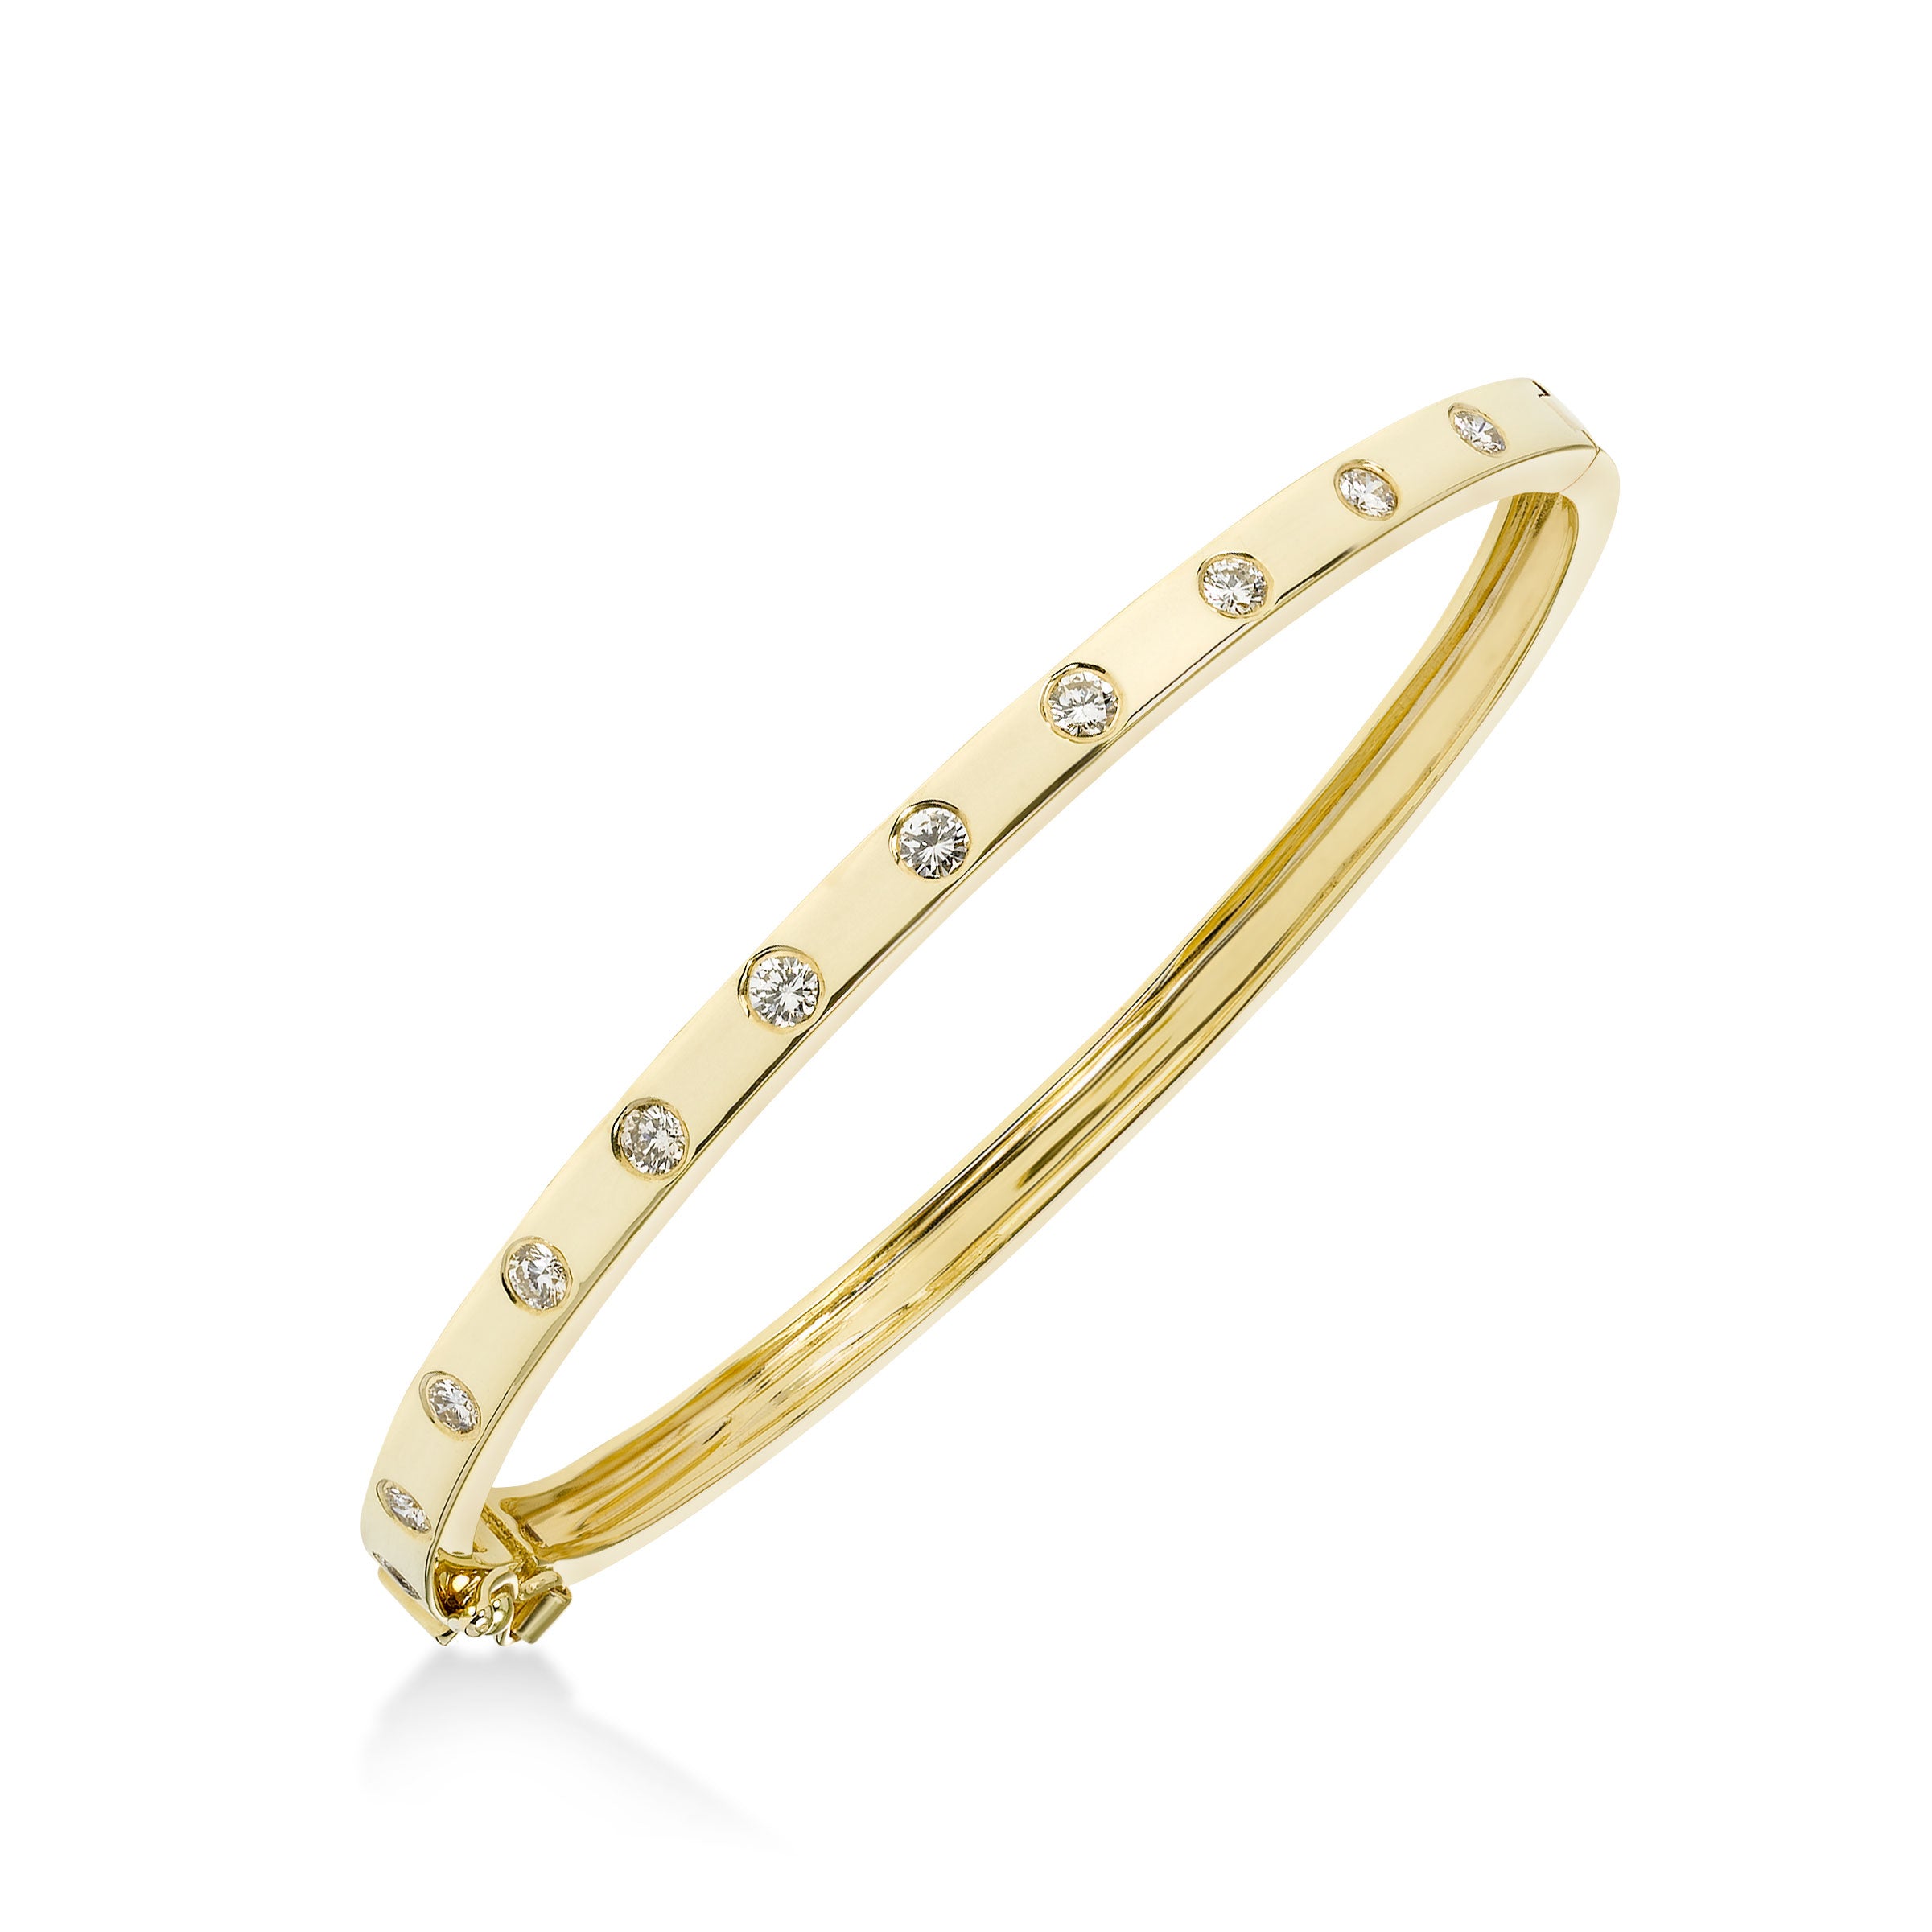 Buy diamond and yellow gold bracelets form manufacturer